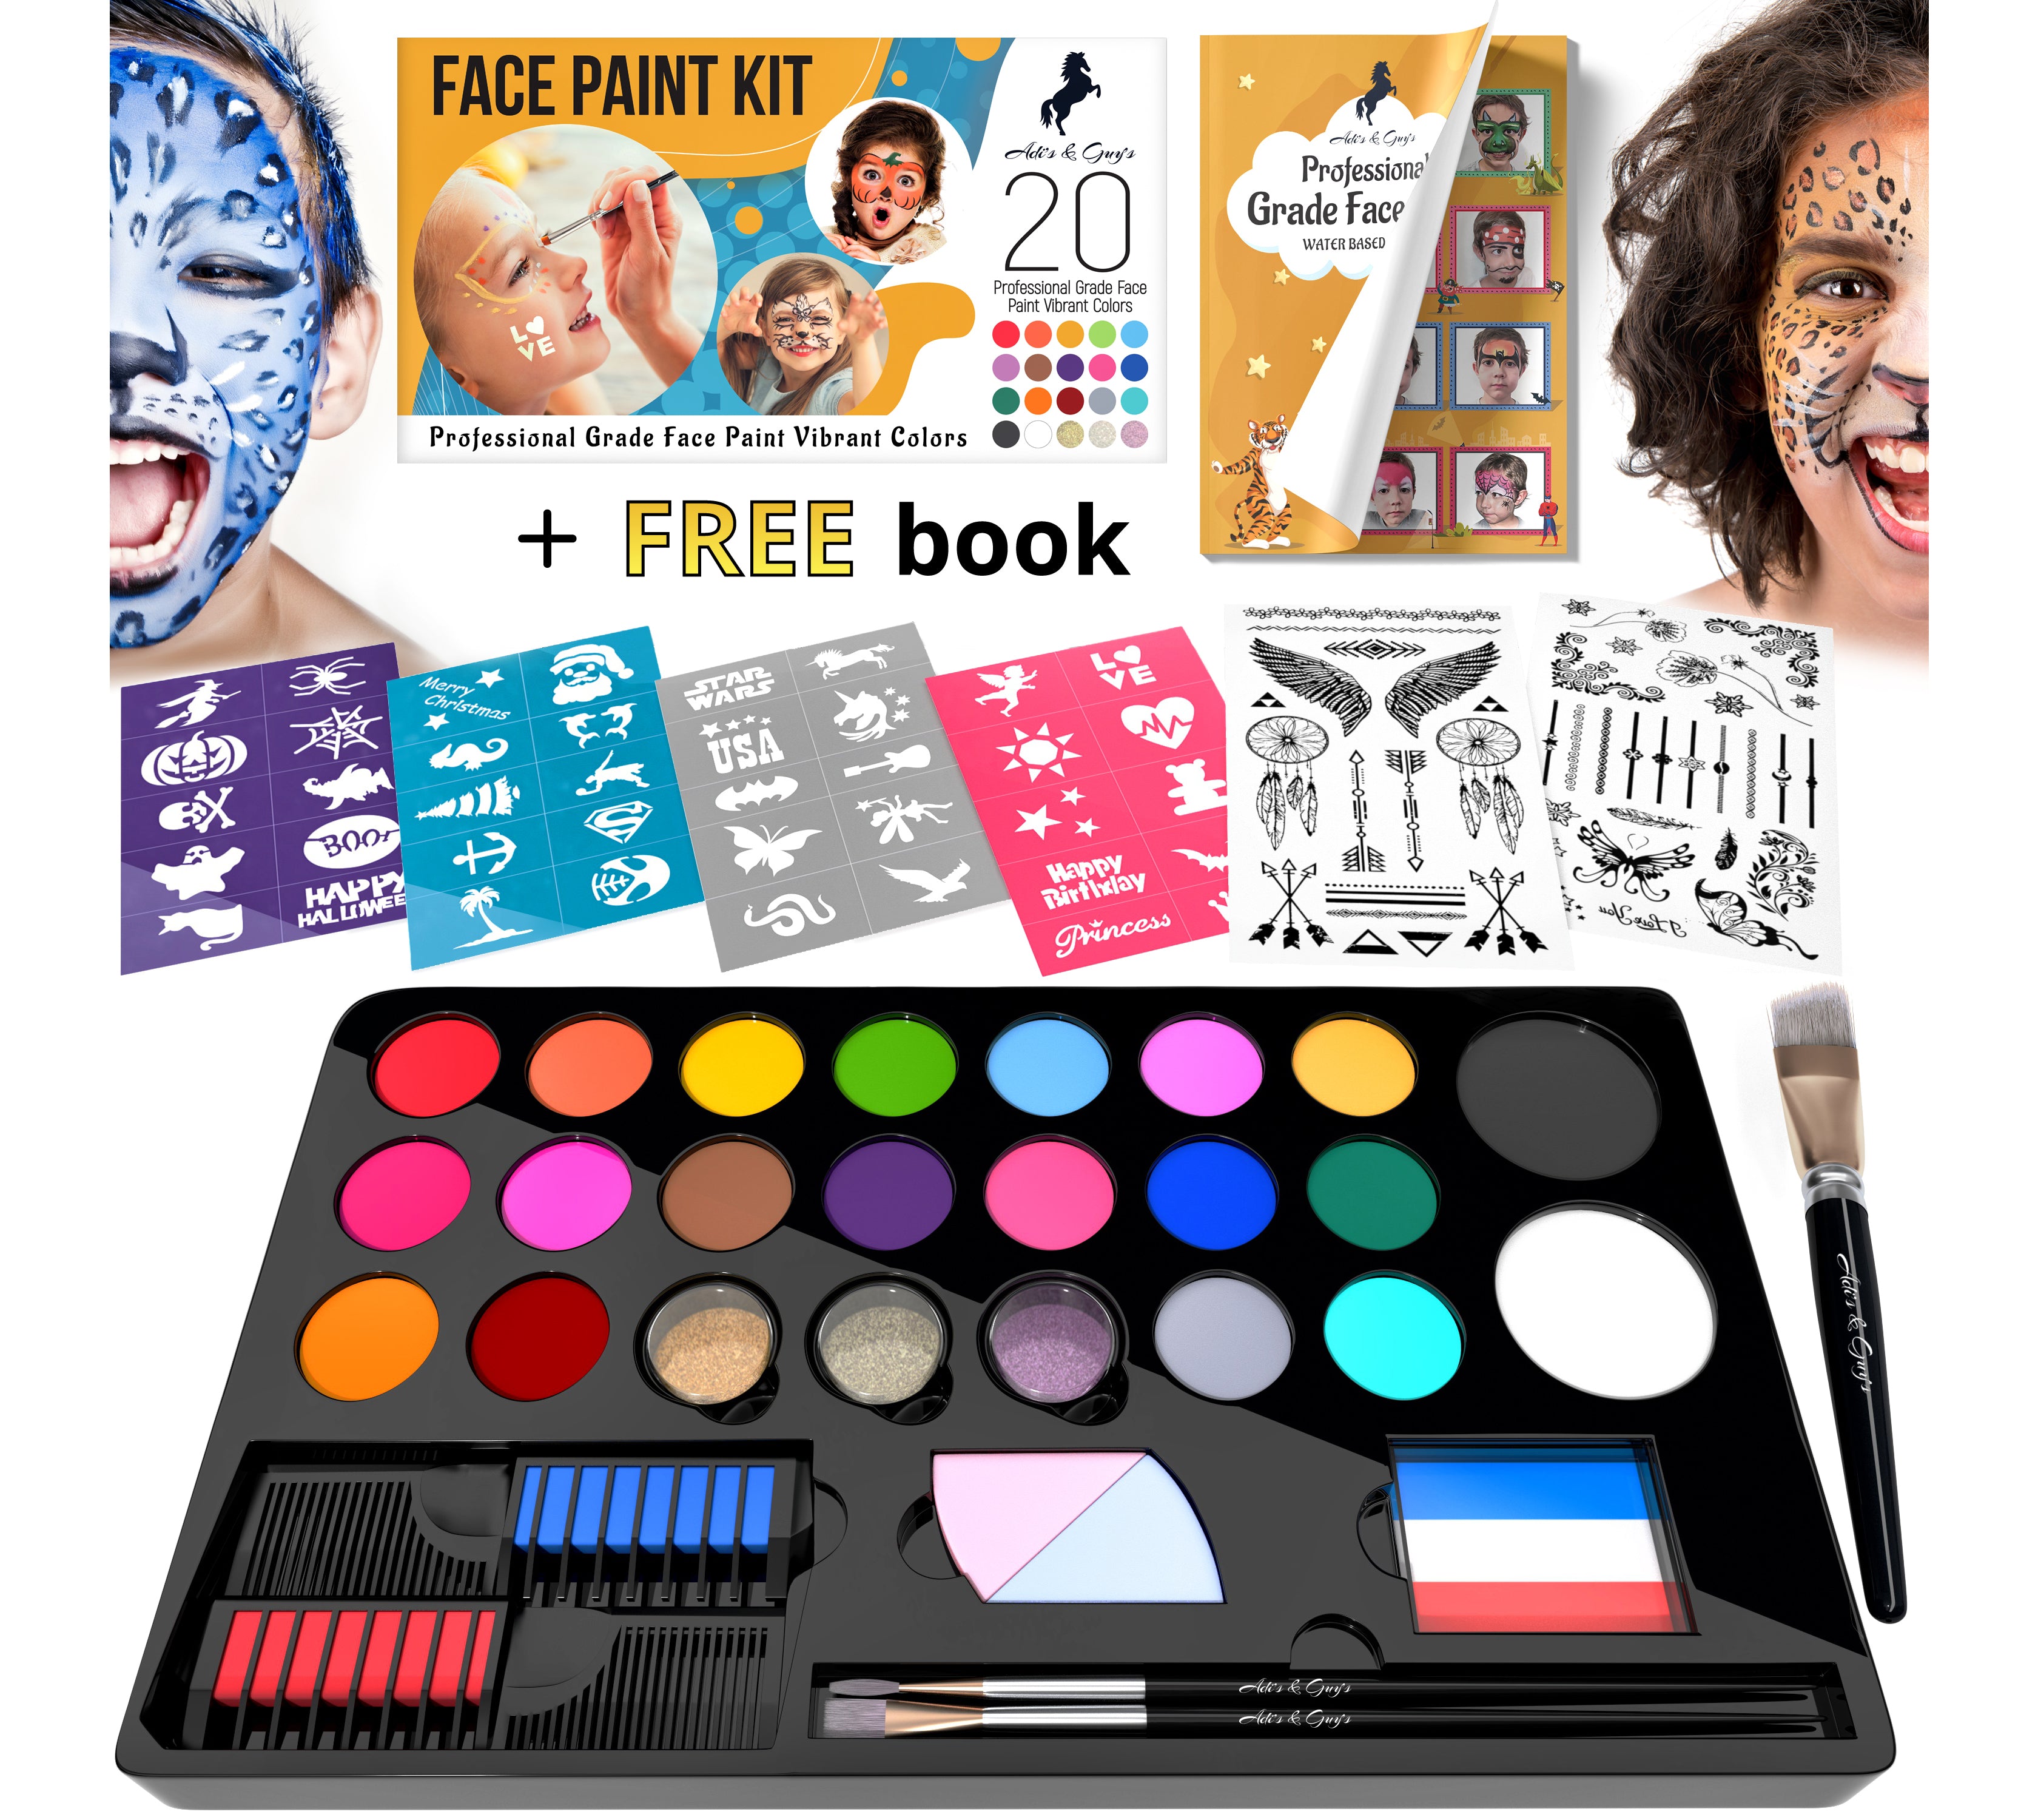 BADCOLOR 18 Colors Face Painting Kit for Kids - Professional Water